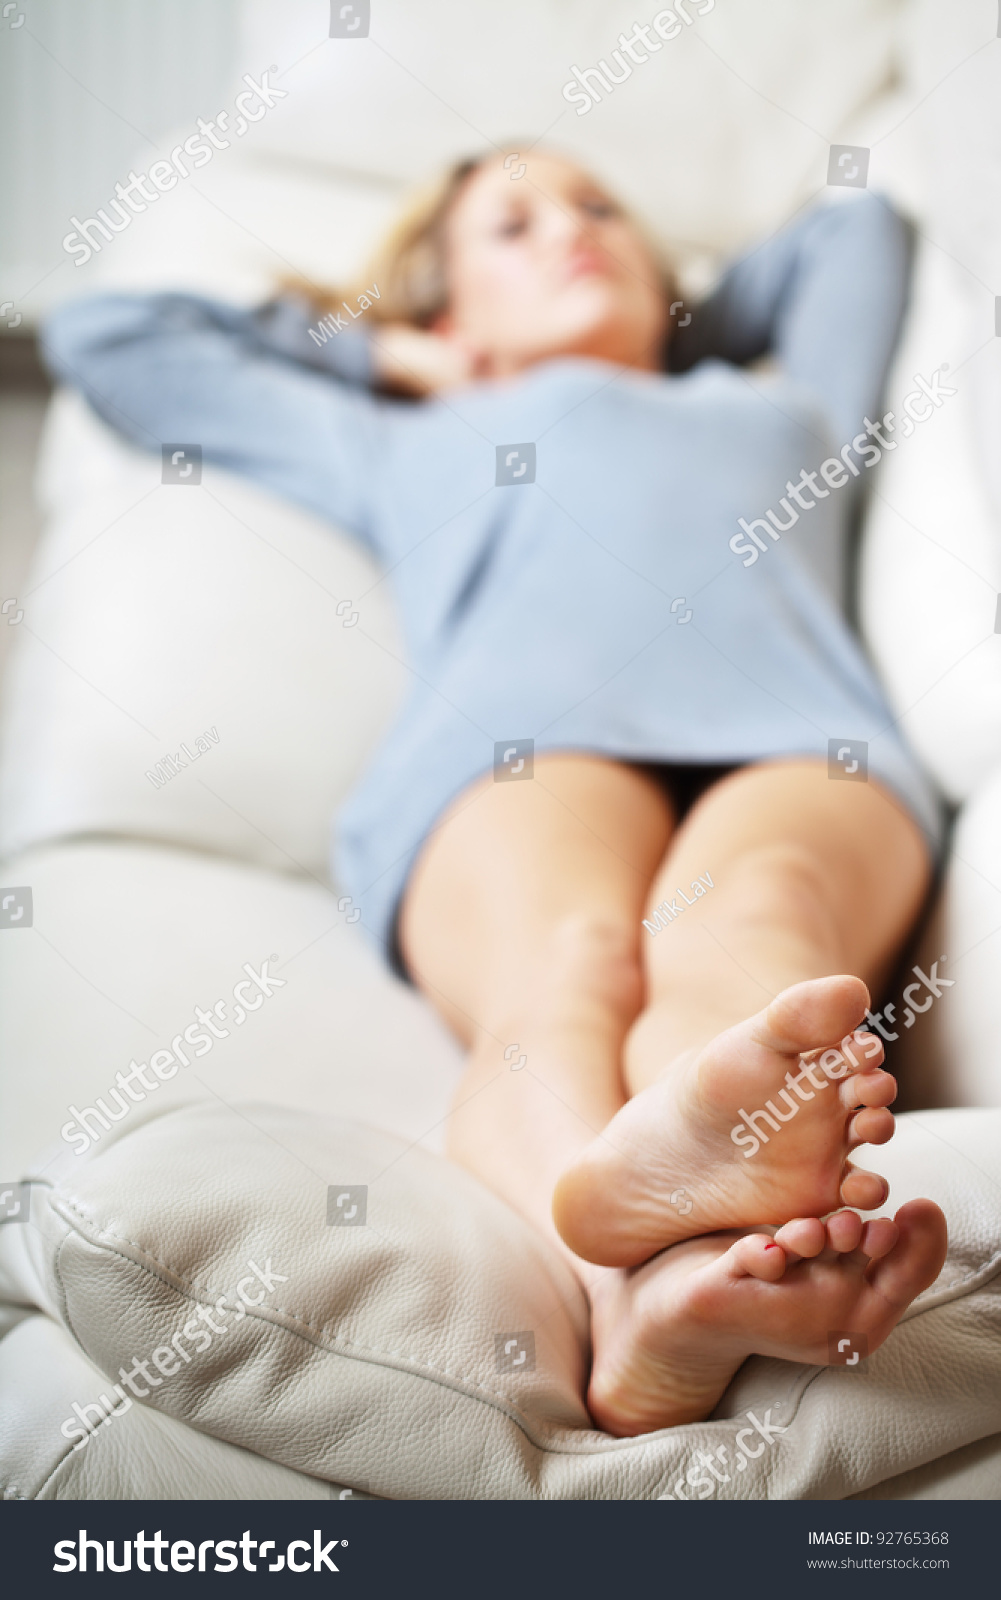 Barefoot Young Woman Lying On Sofa, Shallow Depth Of Field, Focus On ...